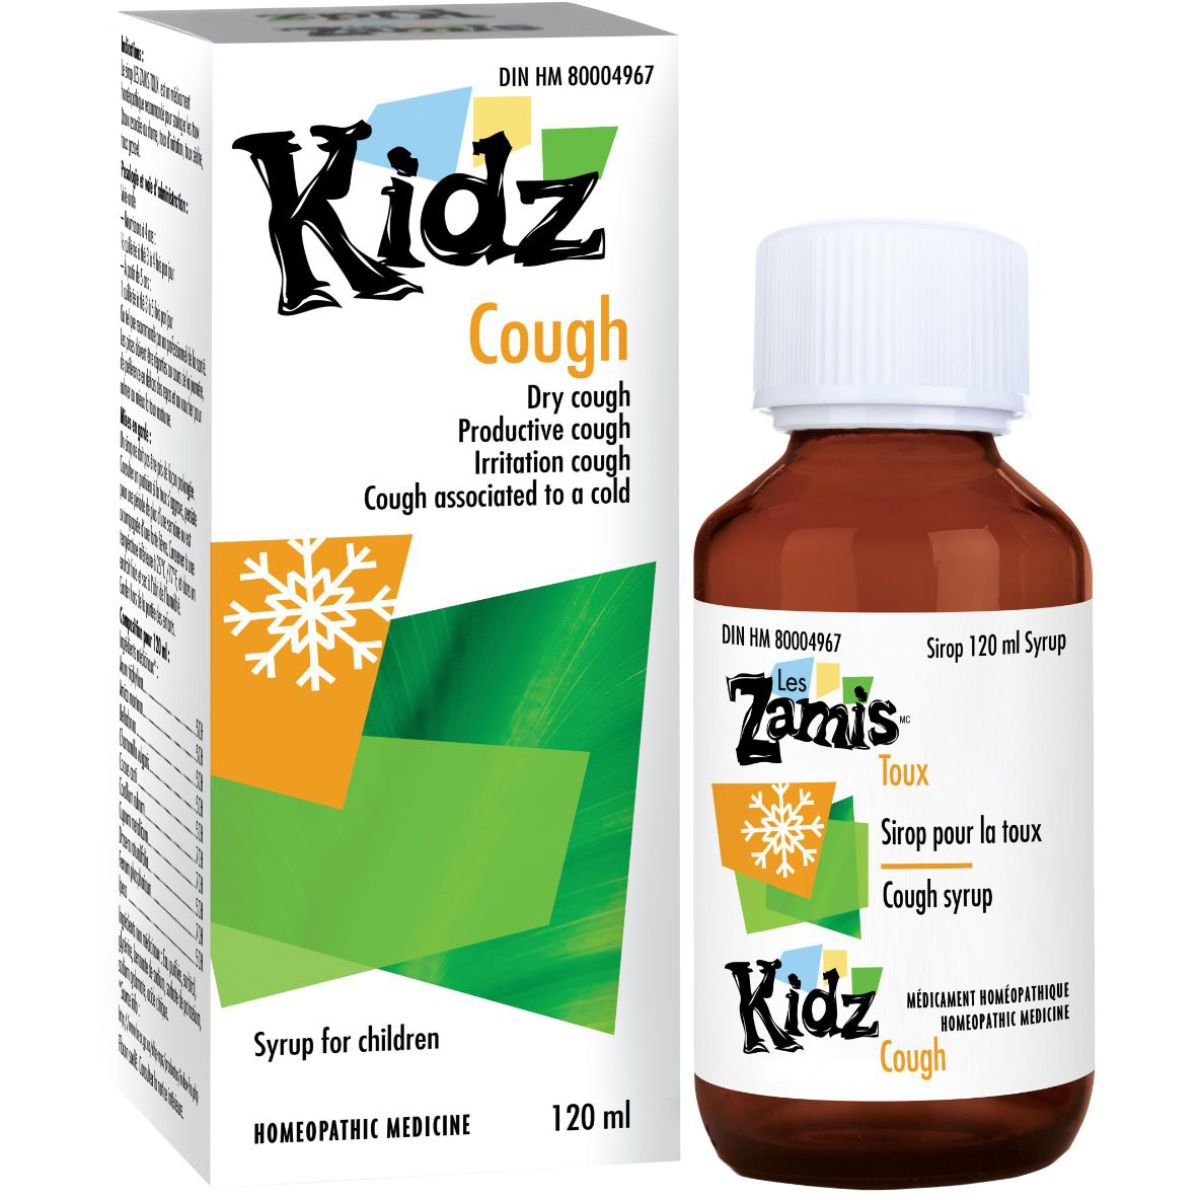 Product Image for Distripharm Les Zamis Cough Syrup 120 ml